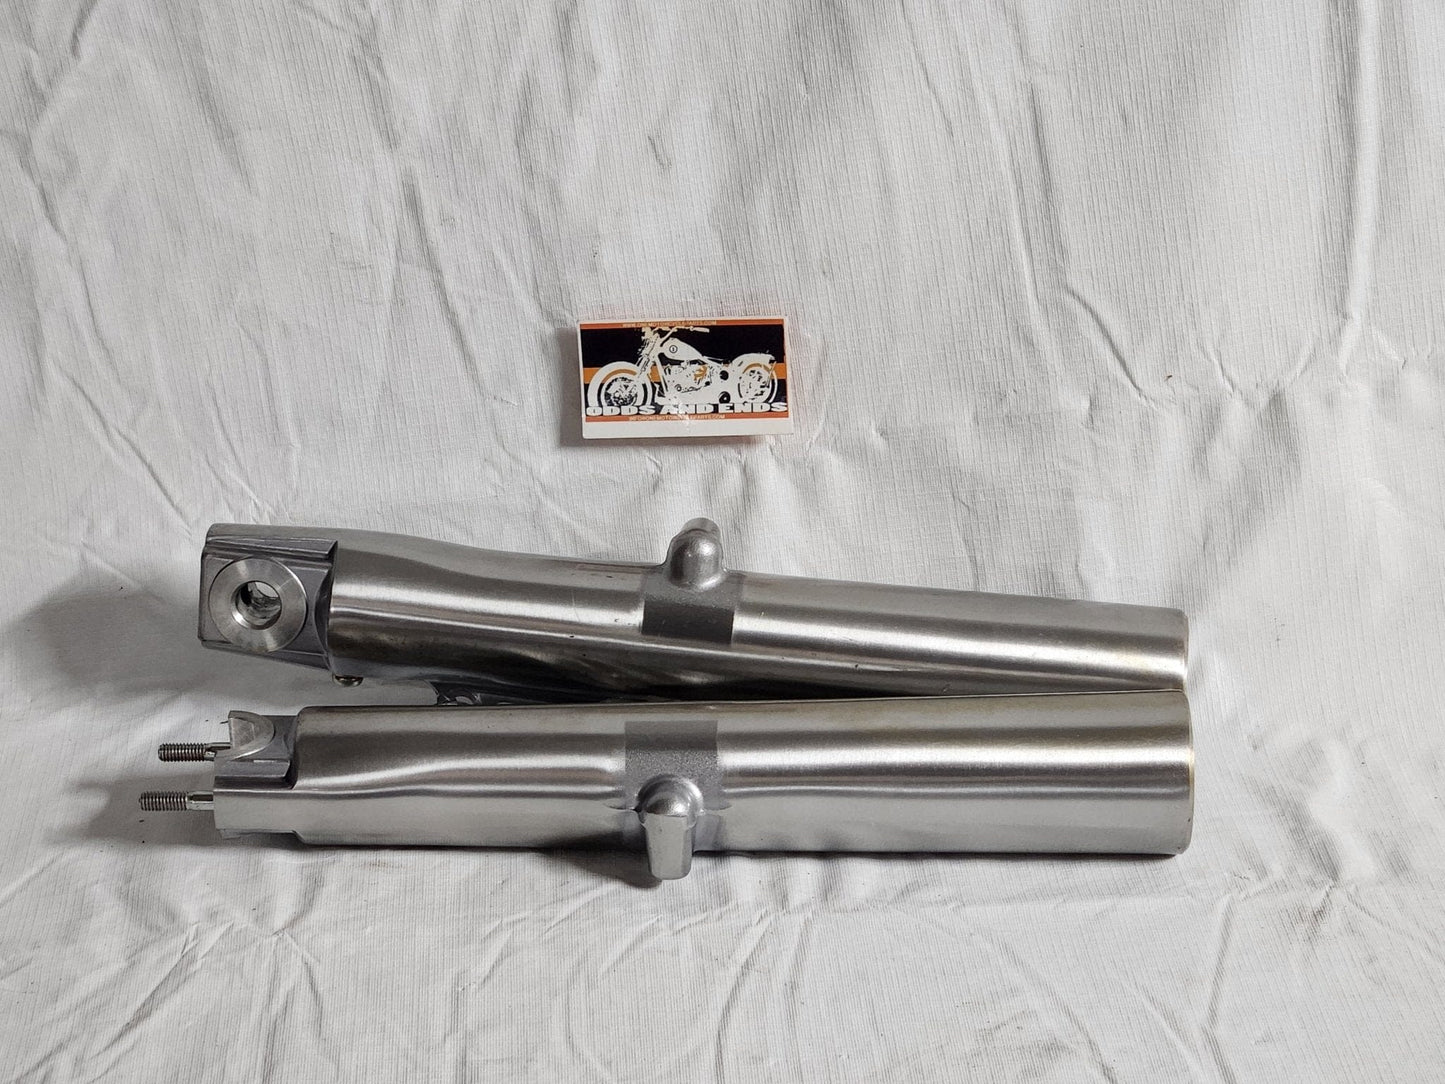 Harley Davidson Showa Front Rork Lowers R46502-06 and L46495-06 - onemotorcycleparts.com